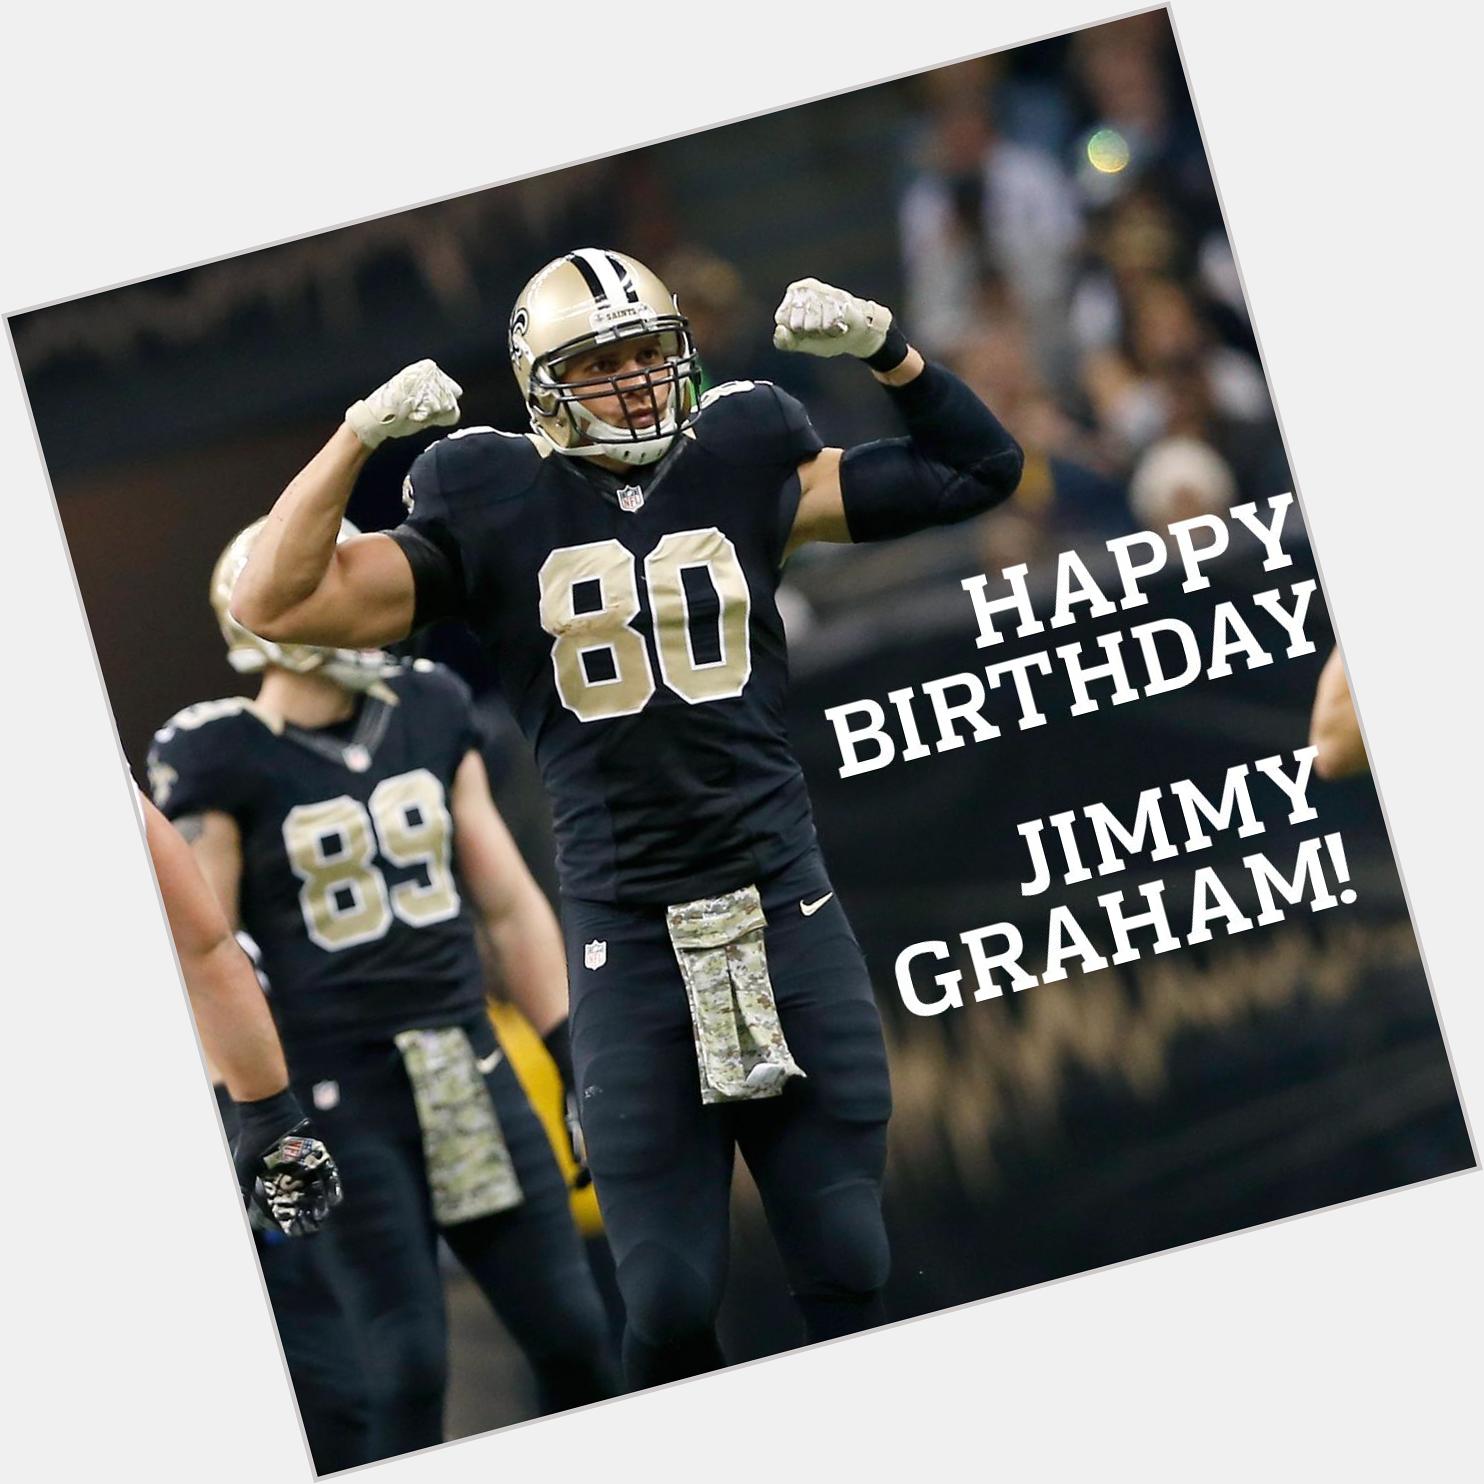 While you wait for (more) football...

to wish TE Jimmy Graham a Happy Birthday! 